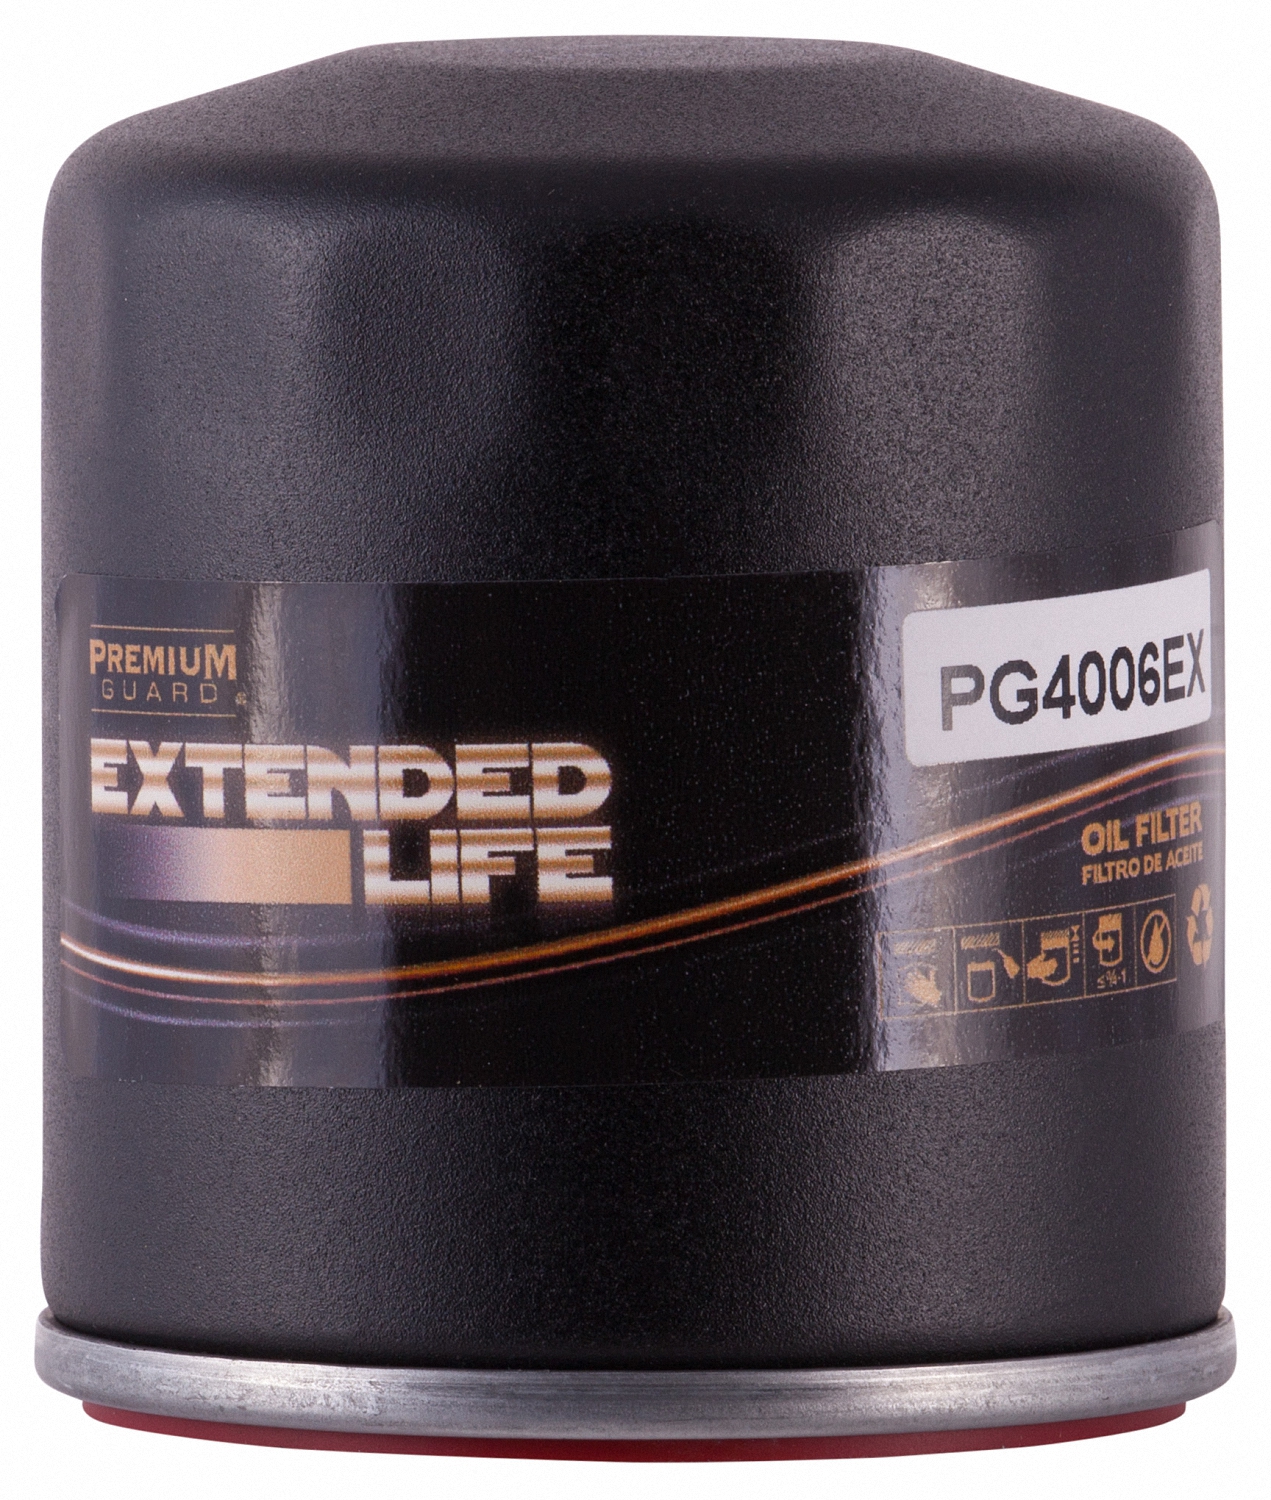 PG4006EX Extended Life Oil Filter up to 10,000 Miles | Fits 2012-1975 Chevrolet, GMC, Hummer, Cadillac, Pontiac, Oldsmobile, Buick, Isuzu, Workhorse Custom Chassis, Avanti (Pack of 6) - image 2 of 6